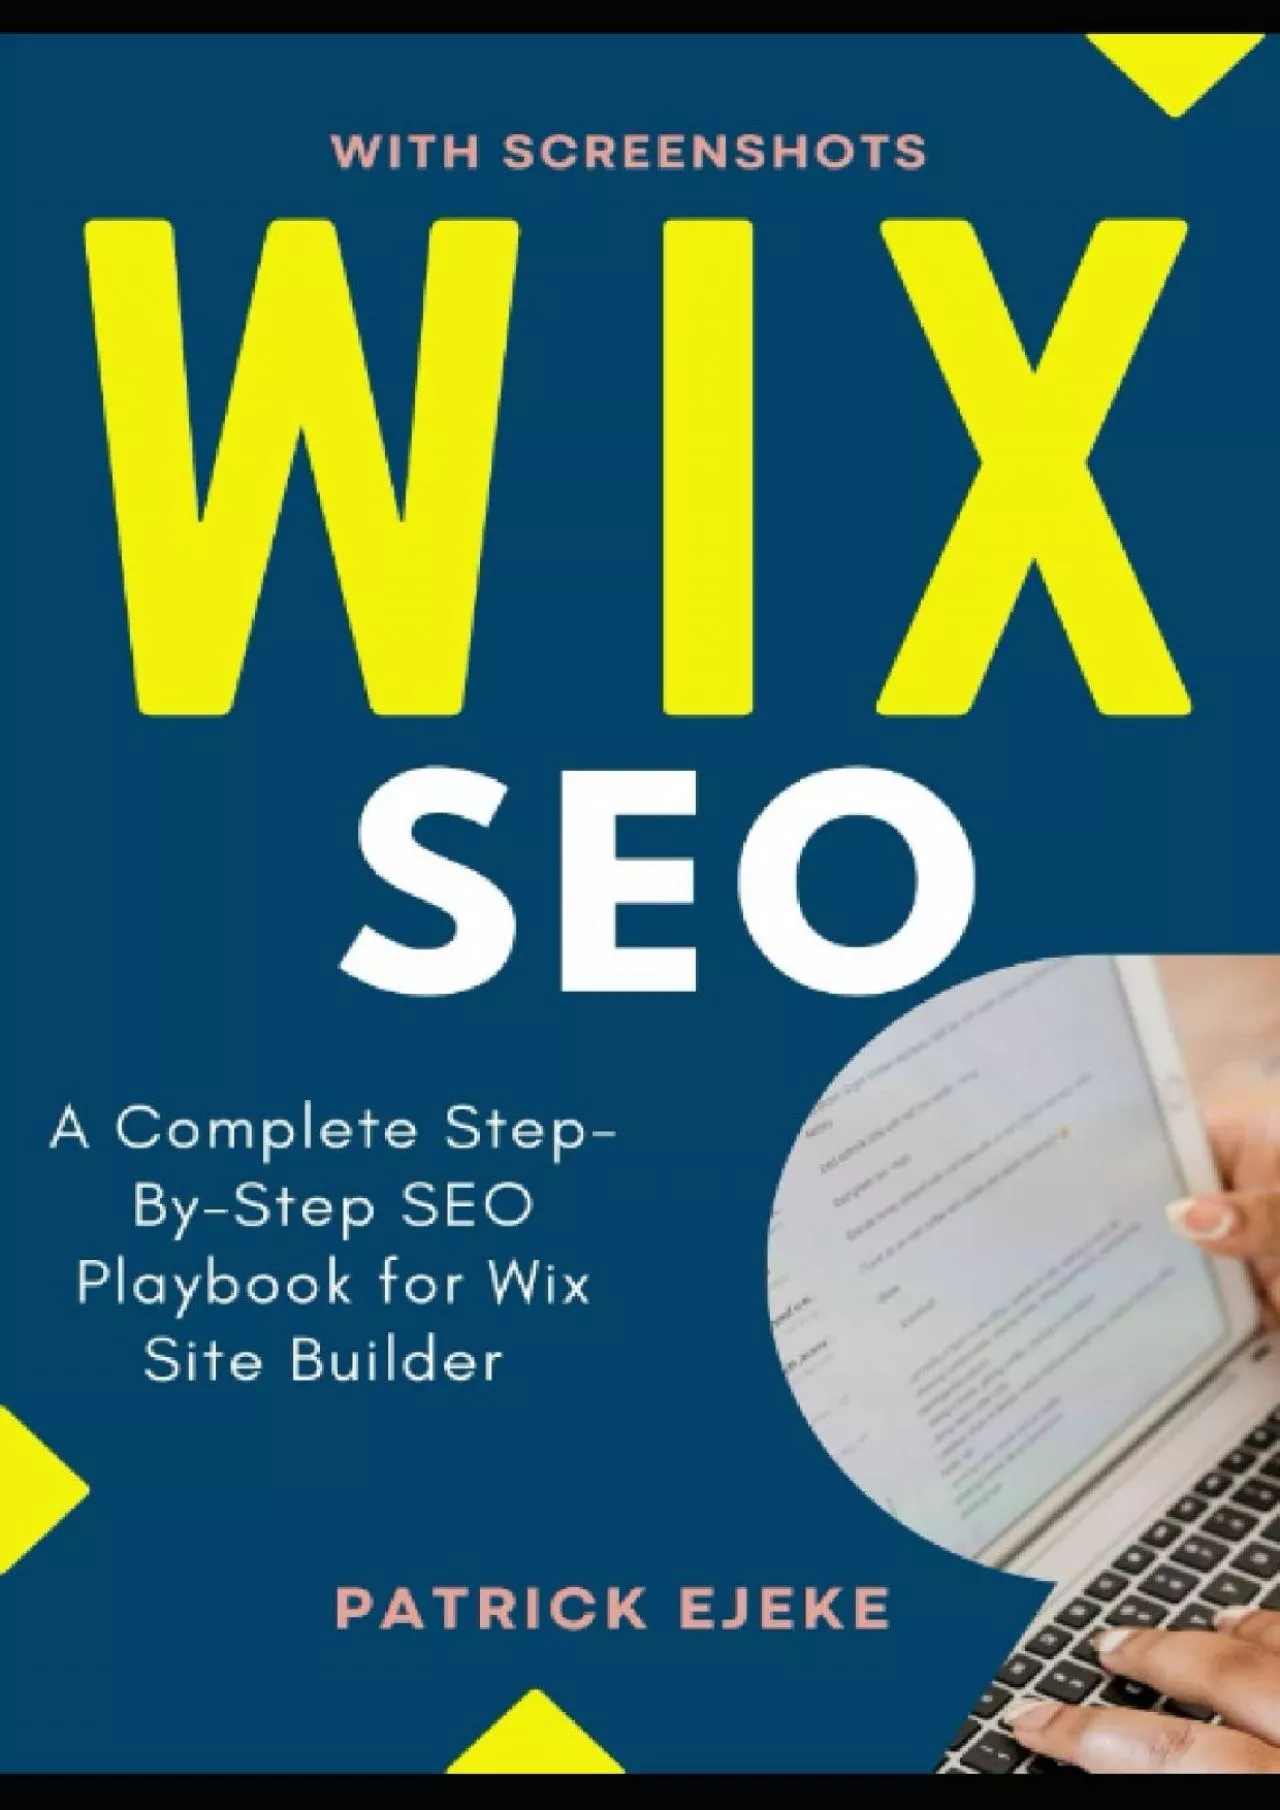 WIX SEO: What is SEO? A Complete Step-By-Step SEO Playbook for Wix Site Builder | Get